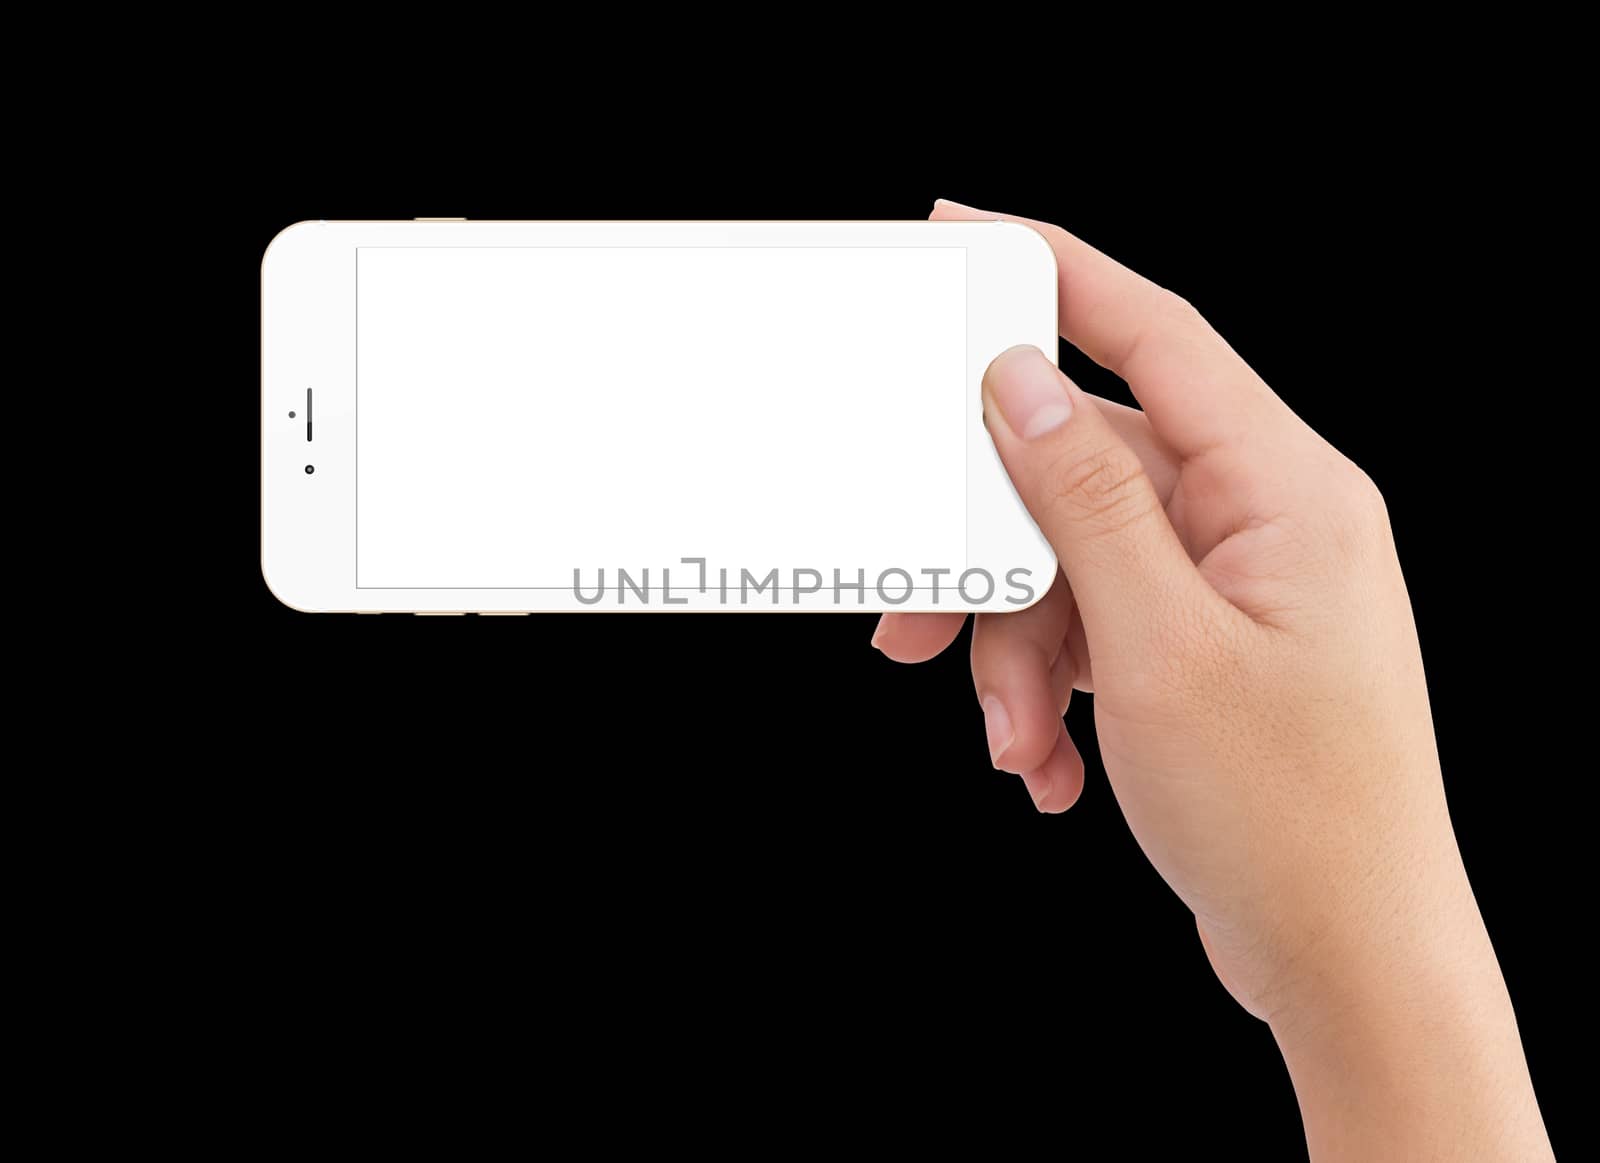 Isolated human right hand holding white mobile smart phone mockup on black background